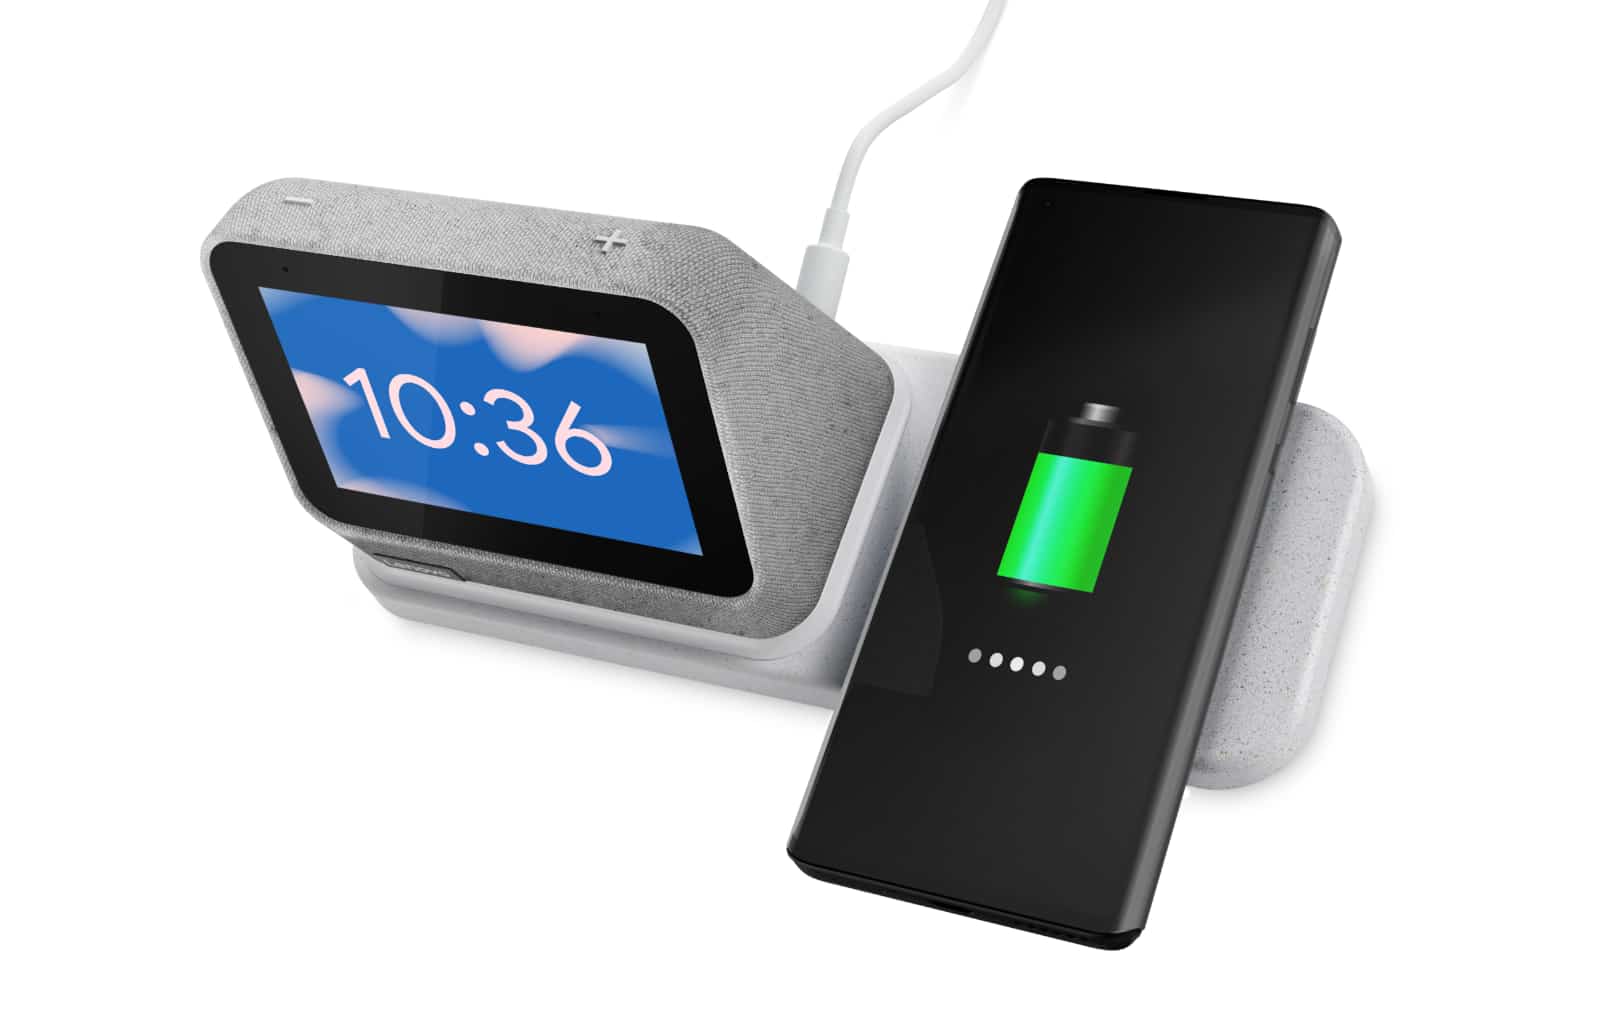 Lenovo's Smart Clock 2 offers a wireless charger option – Pickr